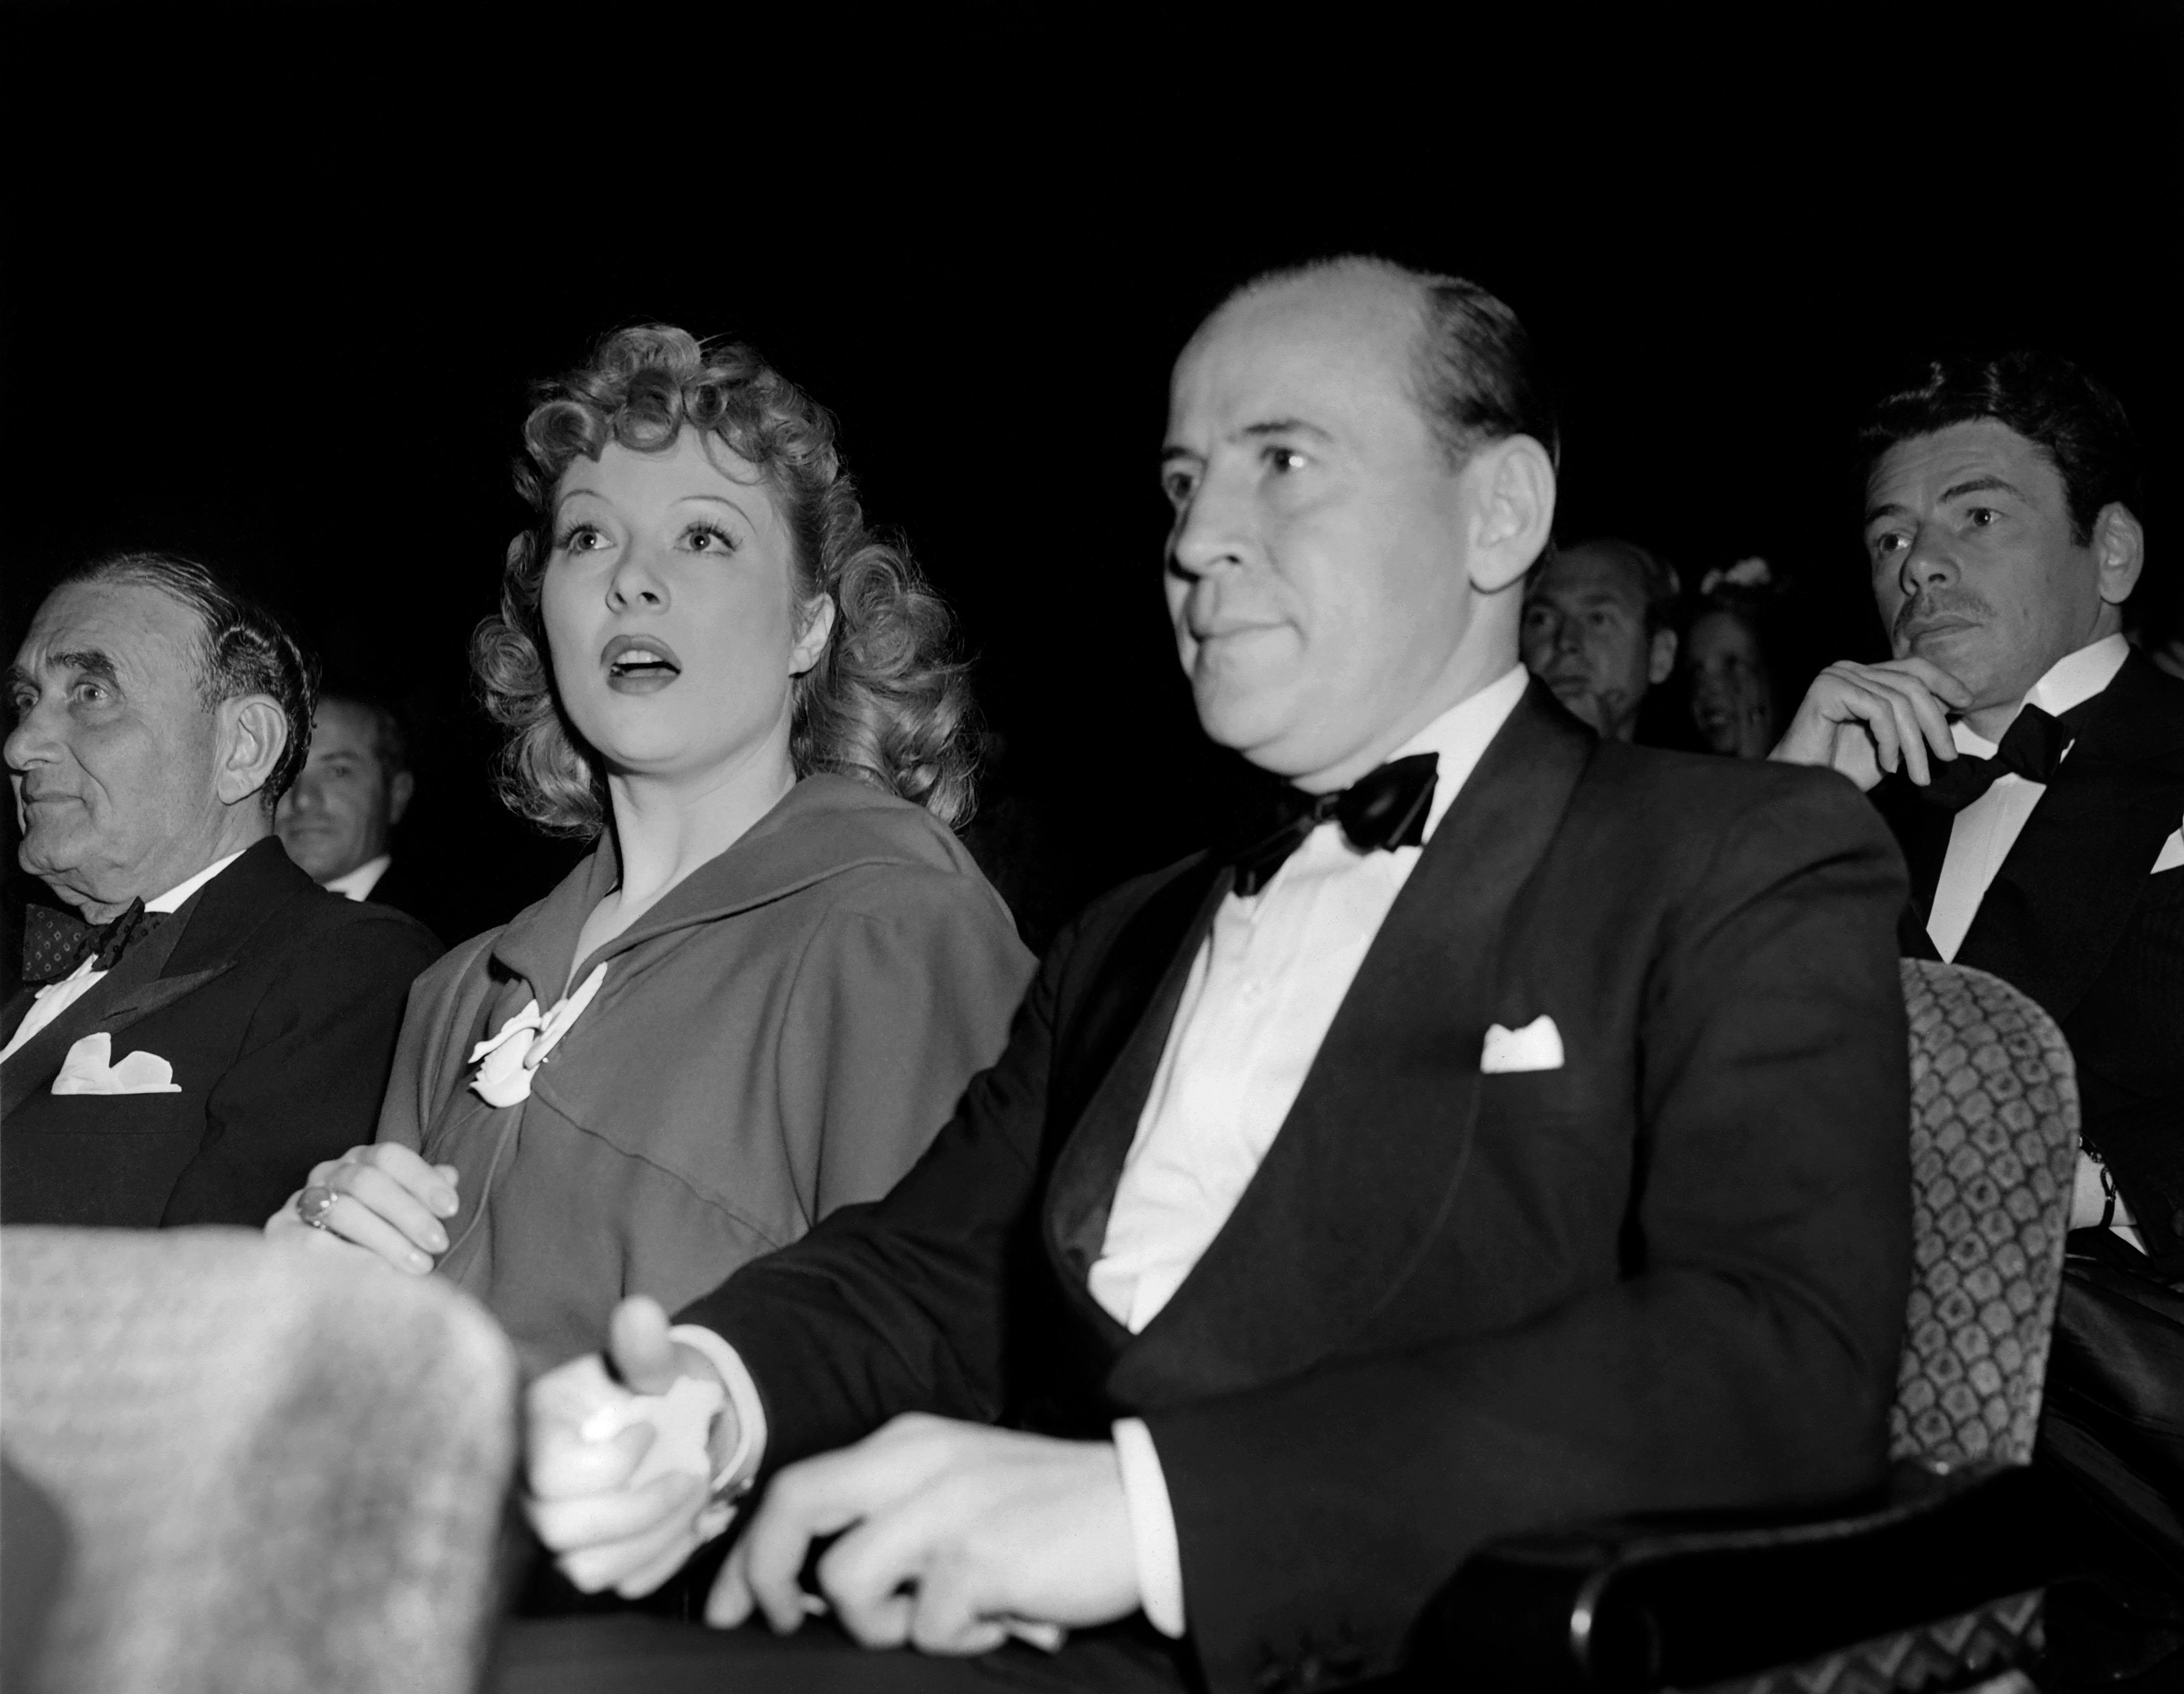 Greer Garson and film producer Benjamin Thaw at the premiere of ‘Goodbye, Mr Chips’ on 17 May 1939